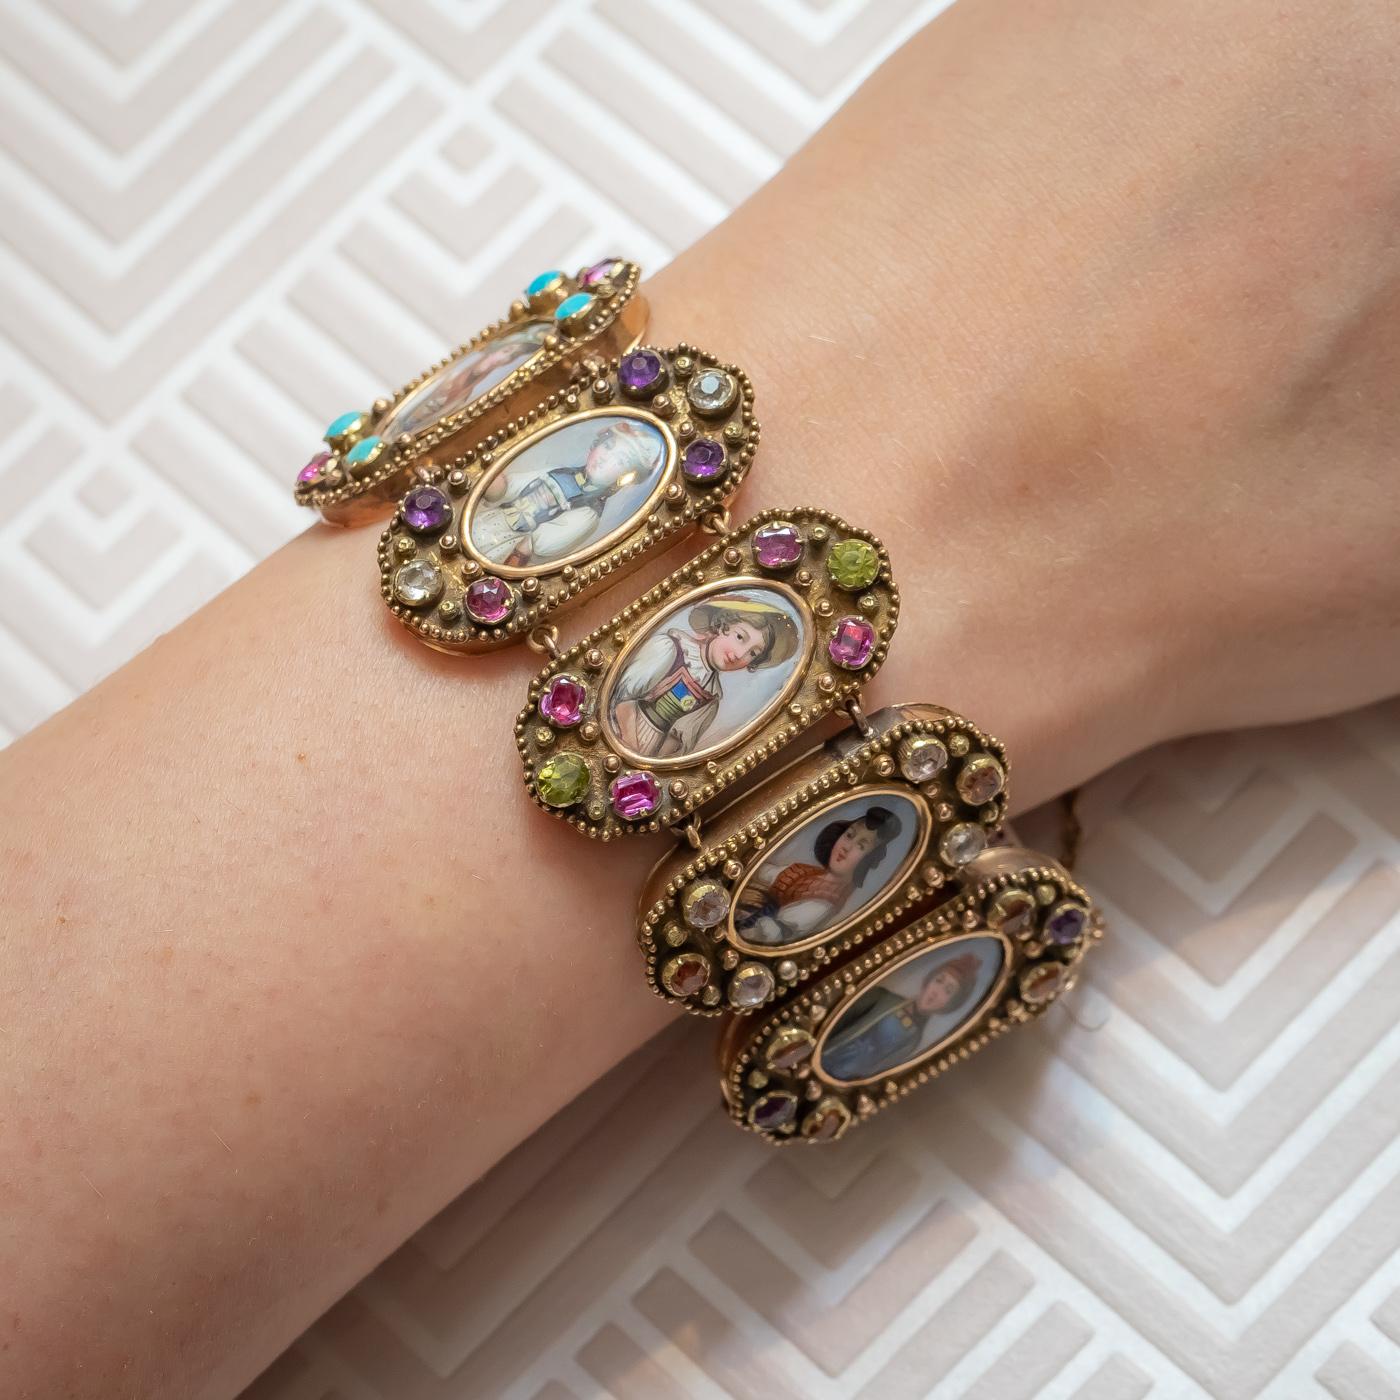 An antique, Swiss Cantons bracelet, with the Cantons represented by portraits of ladies in national costume, in painted enamel; set with rubies, turquoise, hessonite garnet, amethyst, aquamarine, rock crystal and peridot; mounted in gold. Each